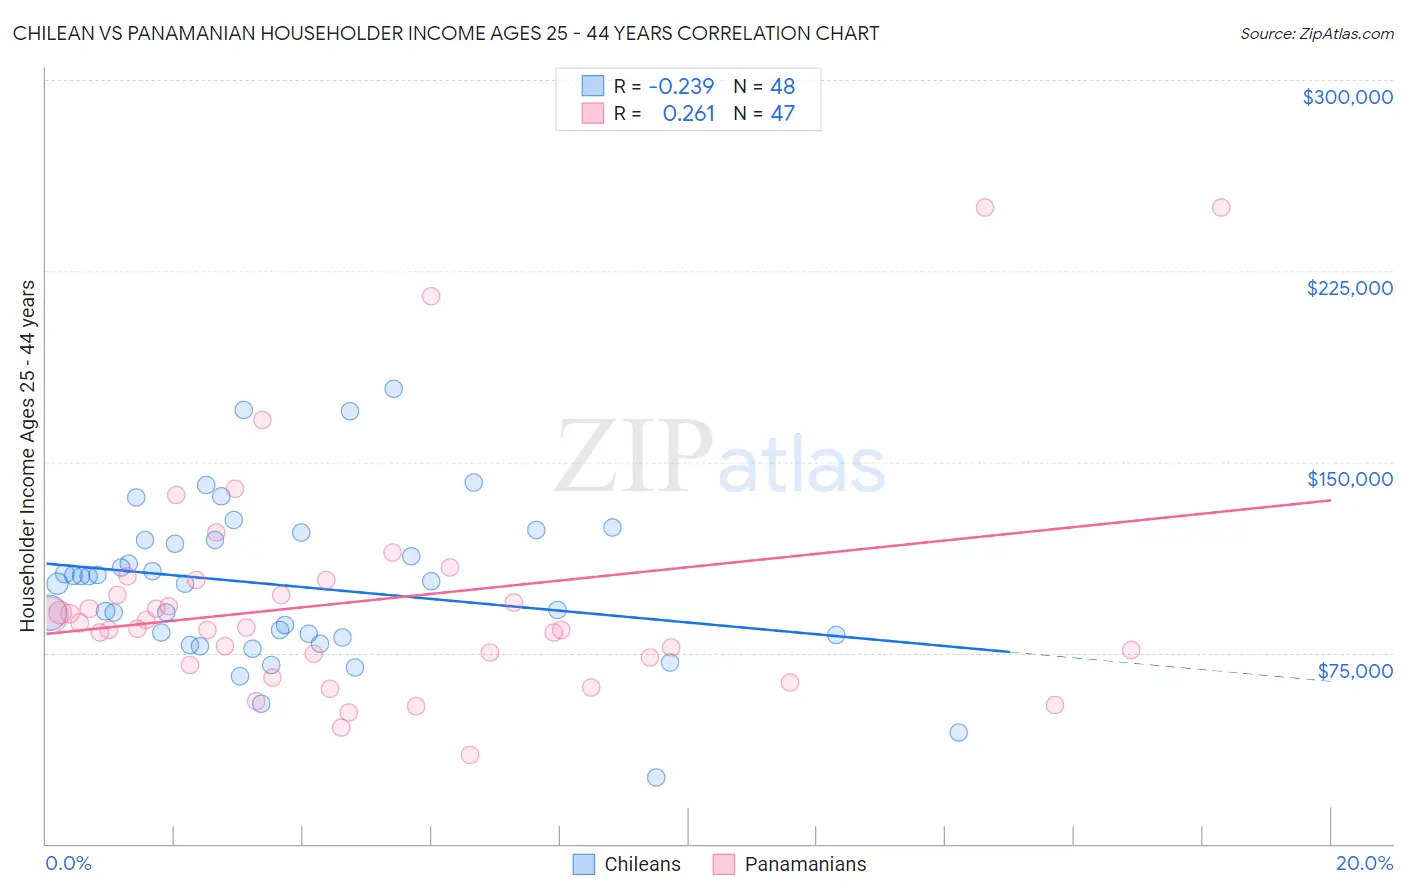 Chilean vs Panamanian Householder Income Ages 25 - 44 years